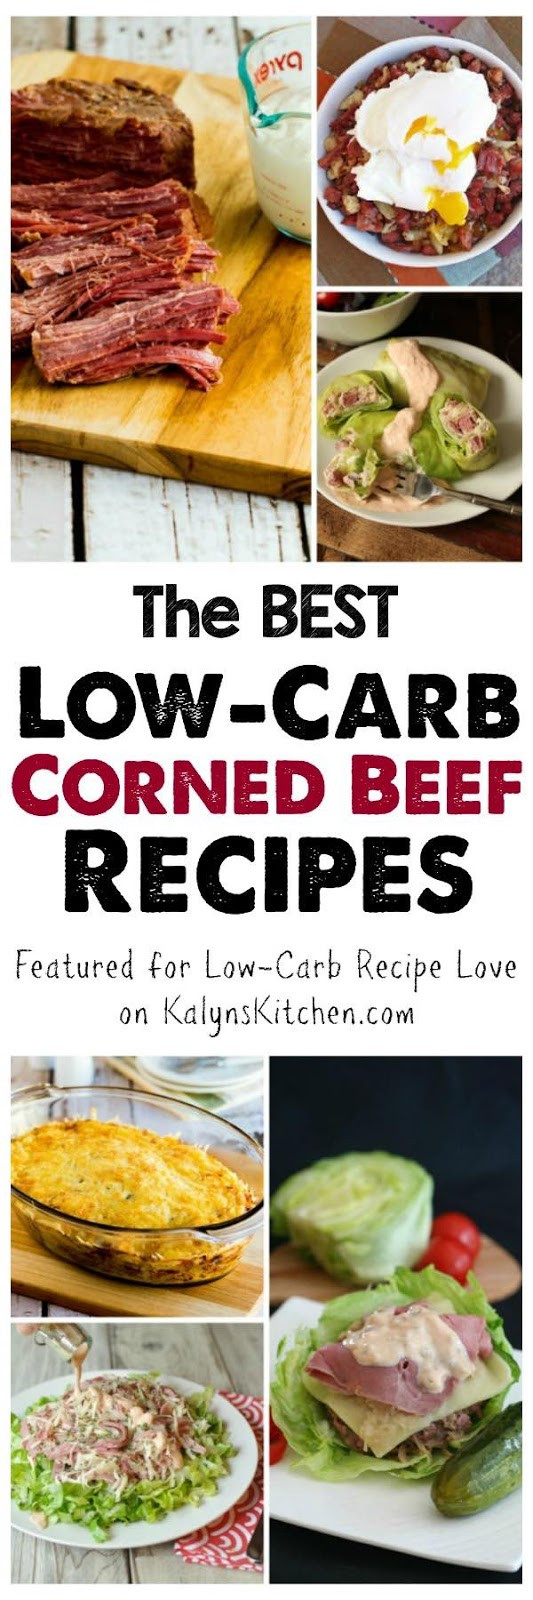 Low Carb Beef Recipes
 Low Carb Corned Beef Recipes Kalyn s Kitchen